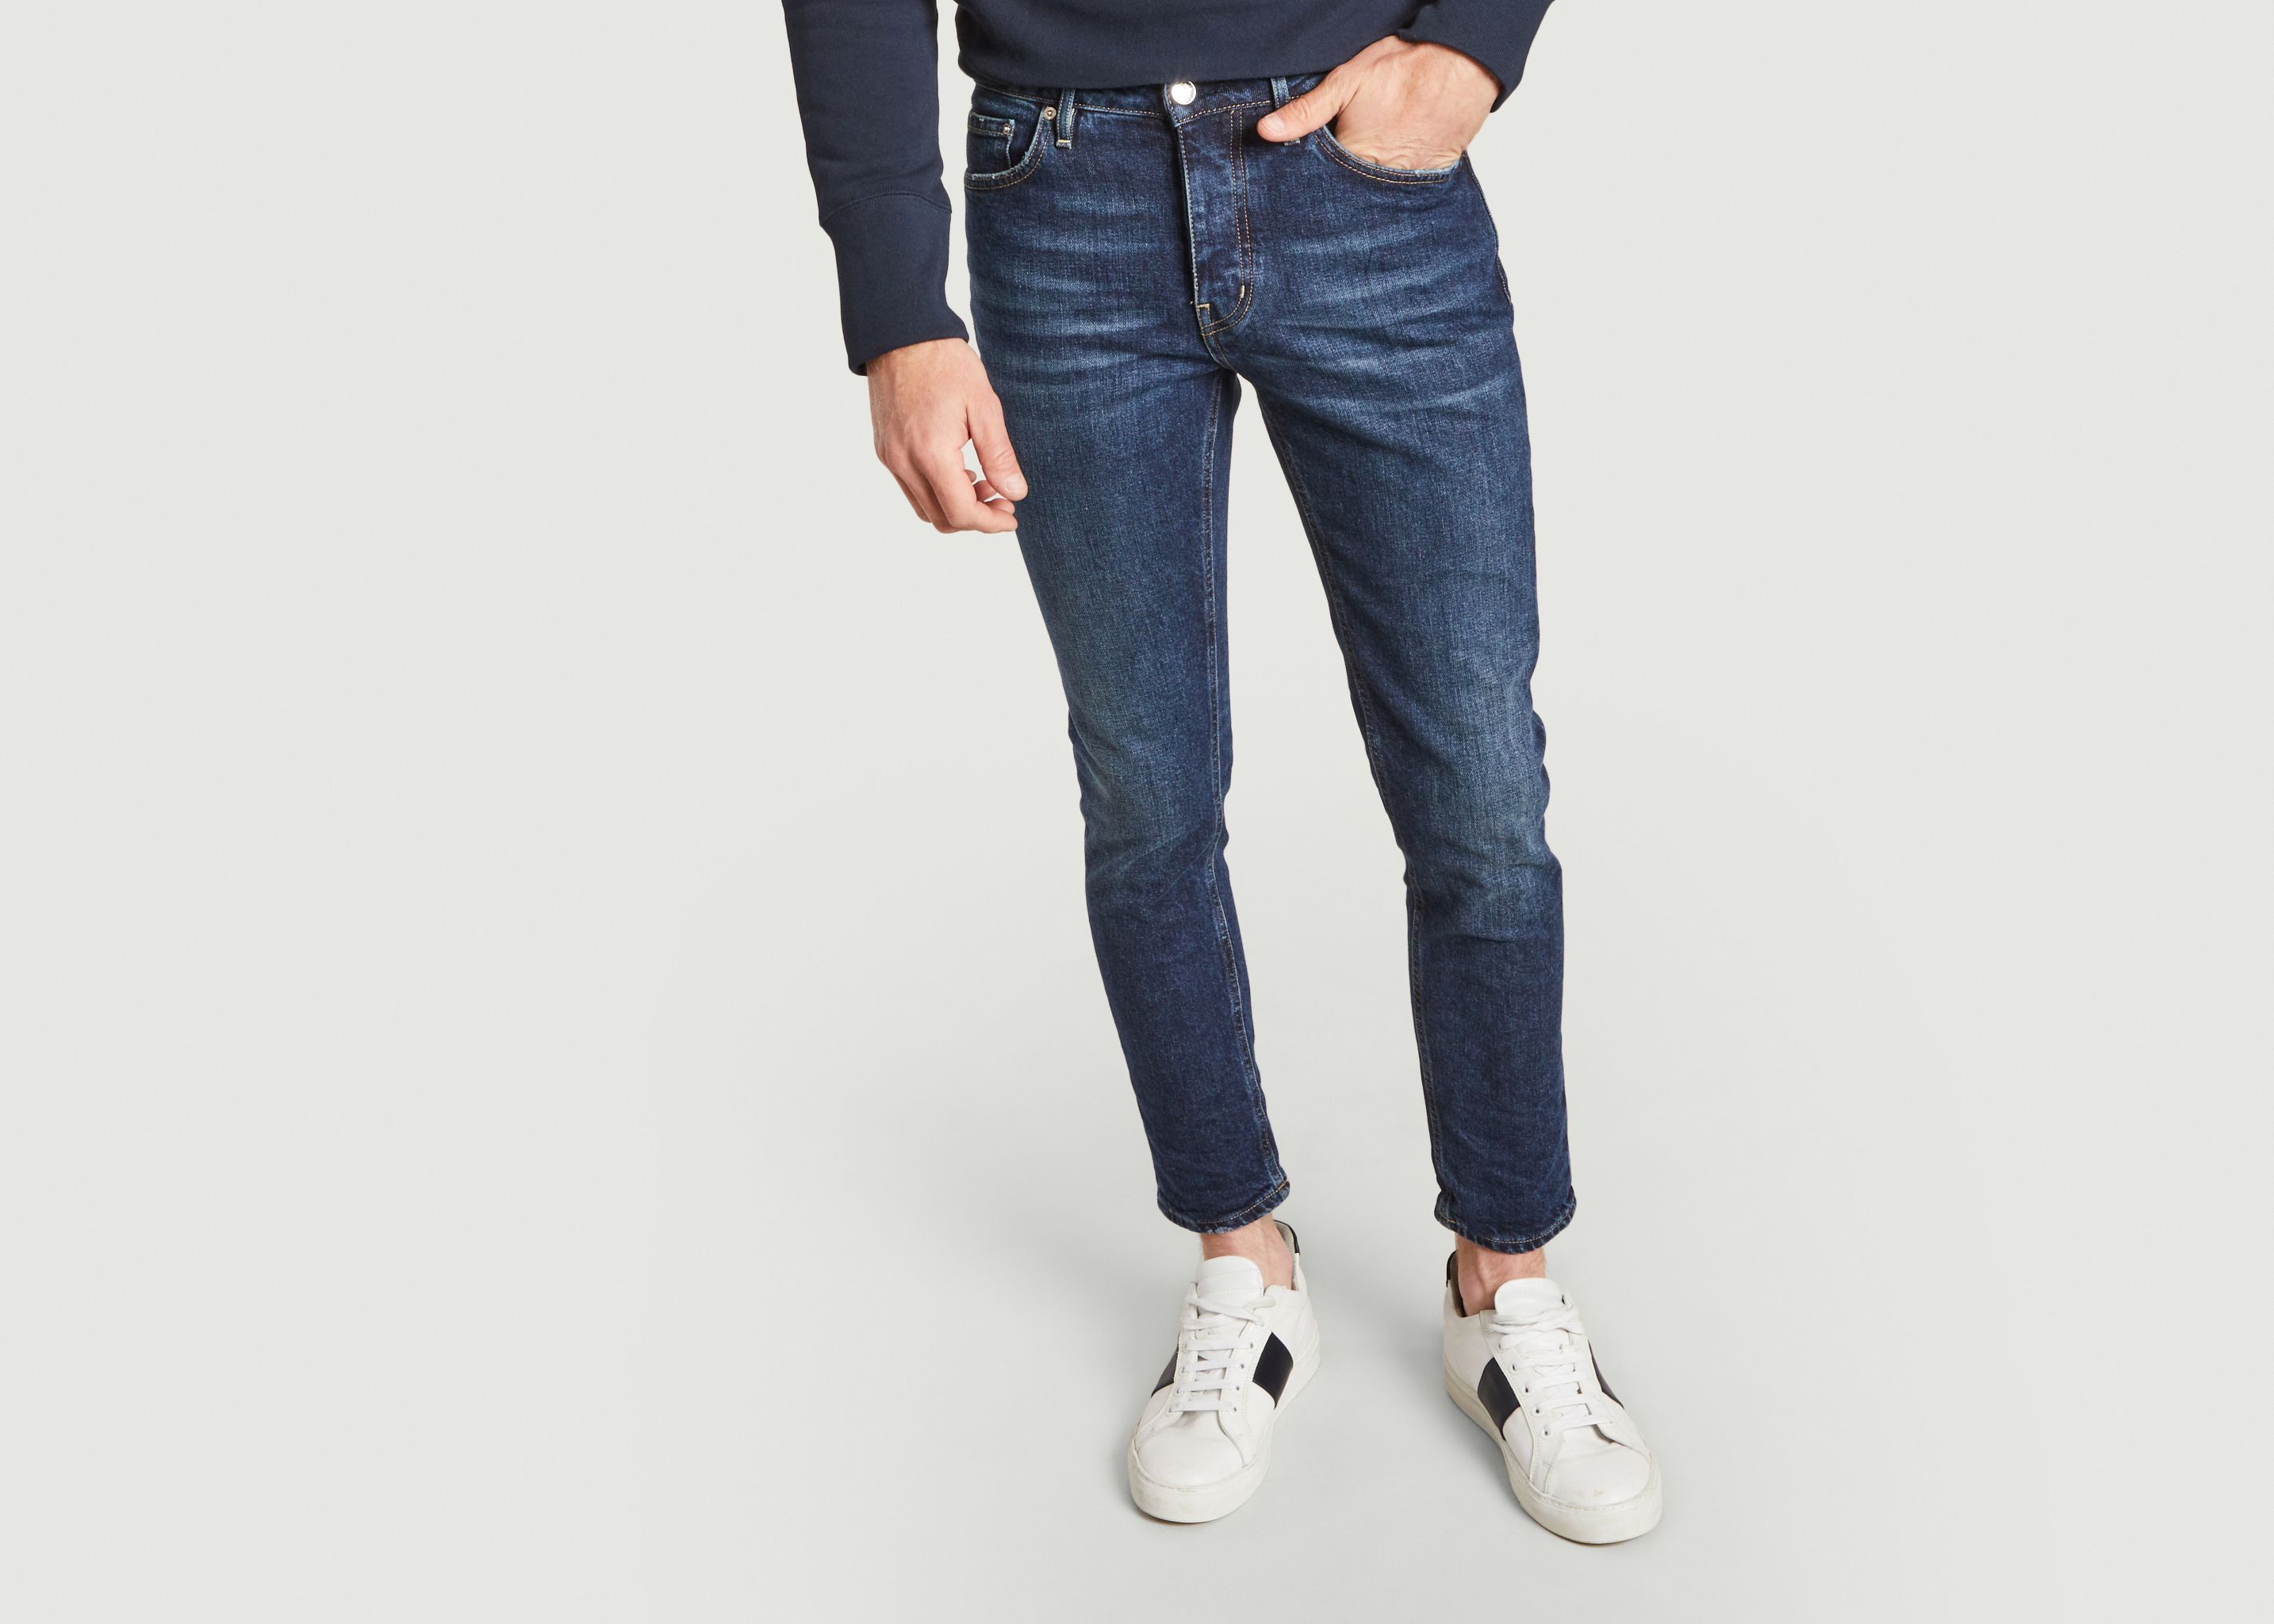 Jean skinny cropped Cleveland - haikure